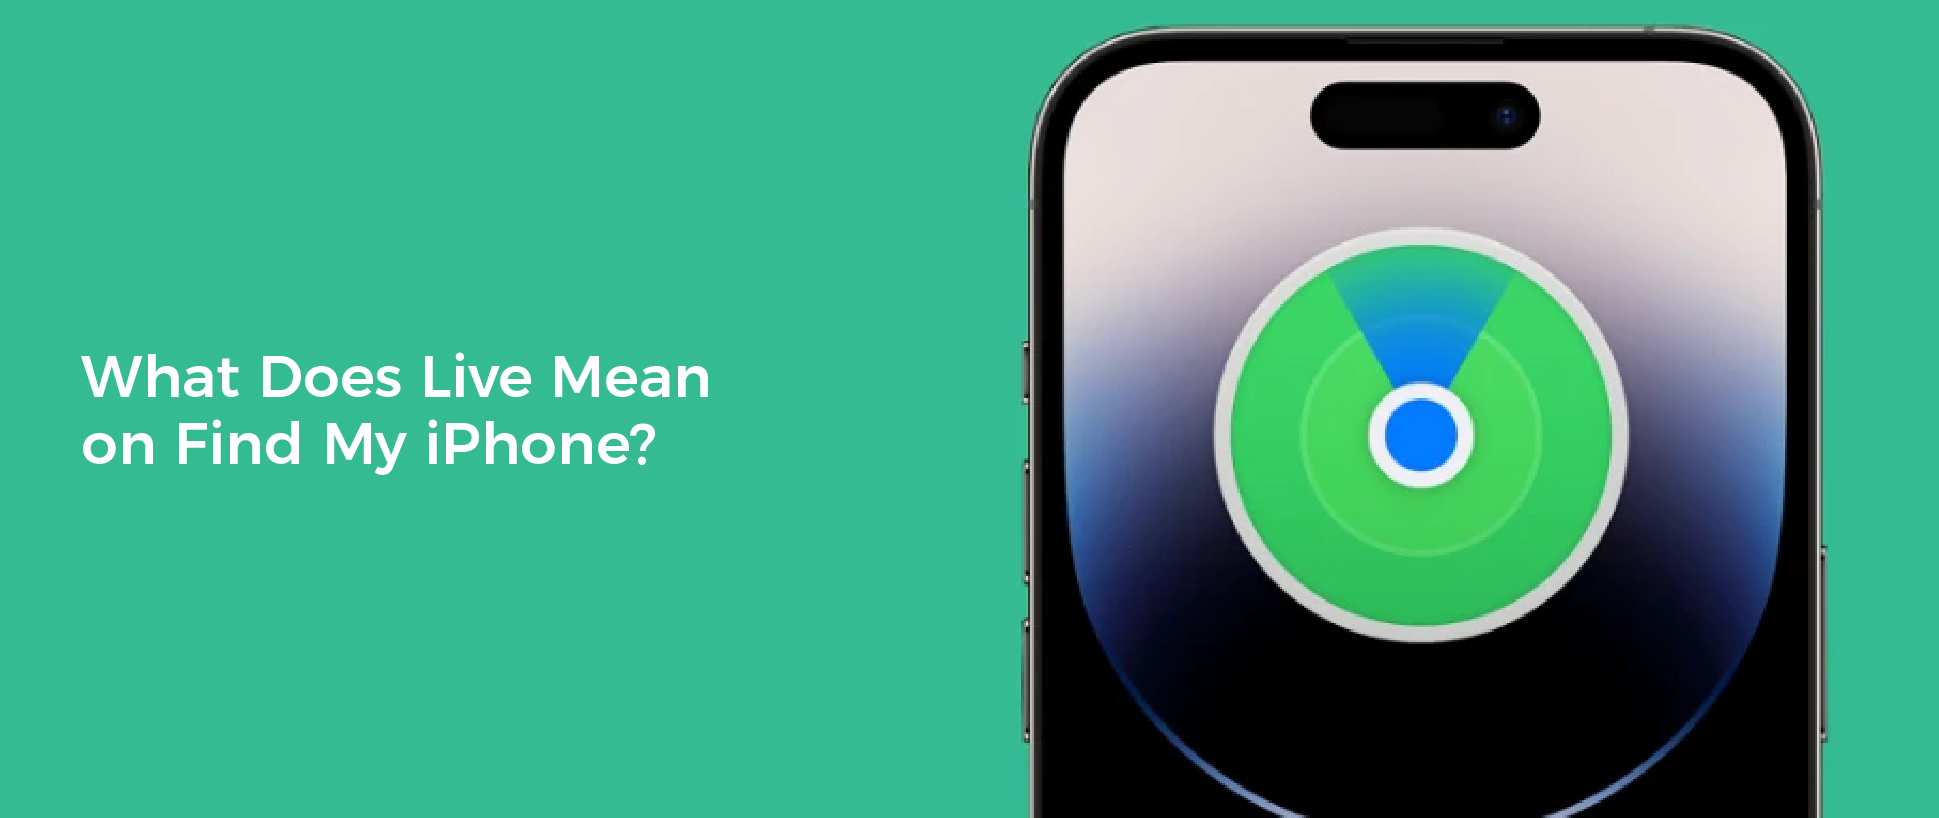 What Does Live Mean on Find My iPhone?